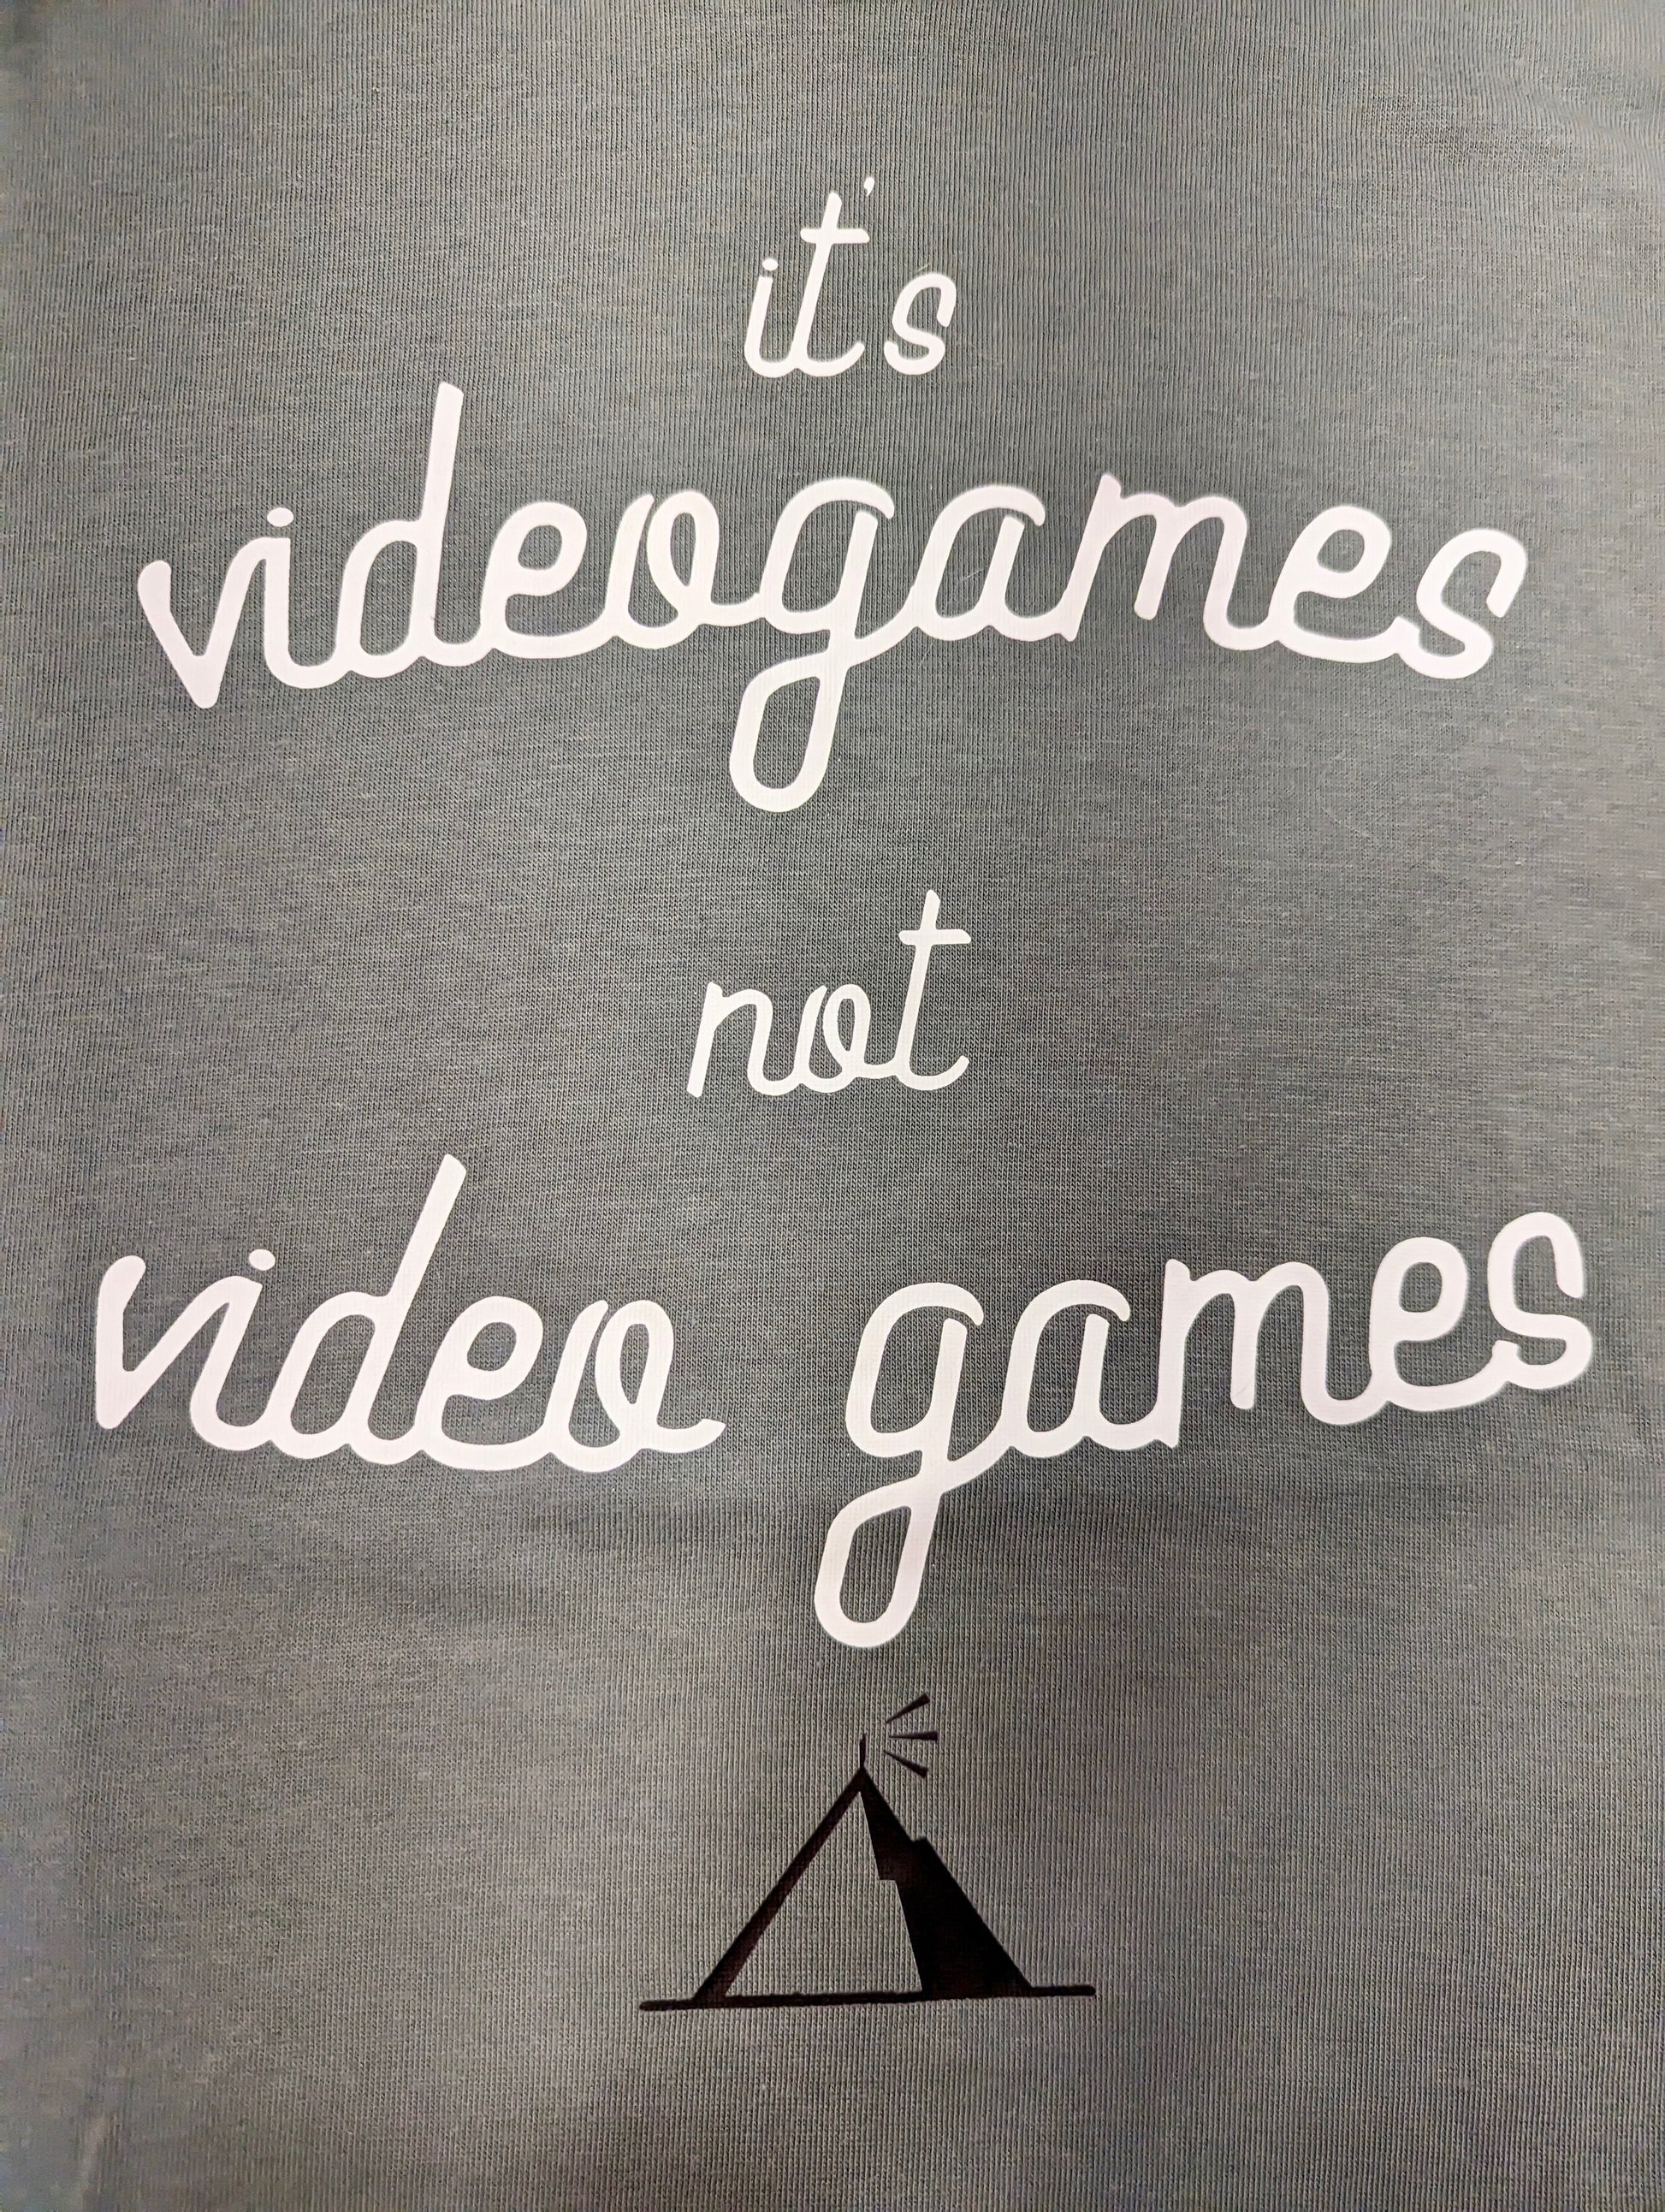 A Sage Green T-Shirt, with cursive writing on it in white. In lowercase letters the first line reads “it’s”, the second line “videogames” spelt as one word, the third line “not” and the fourth line “video games” using two words. In the centre below the text is the Mighty Yell logo in black which features the illustration of a mountain and a person on top yelling. There are three small lines coming out of the person’s mouth.